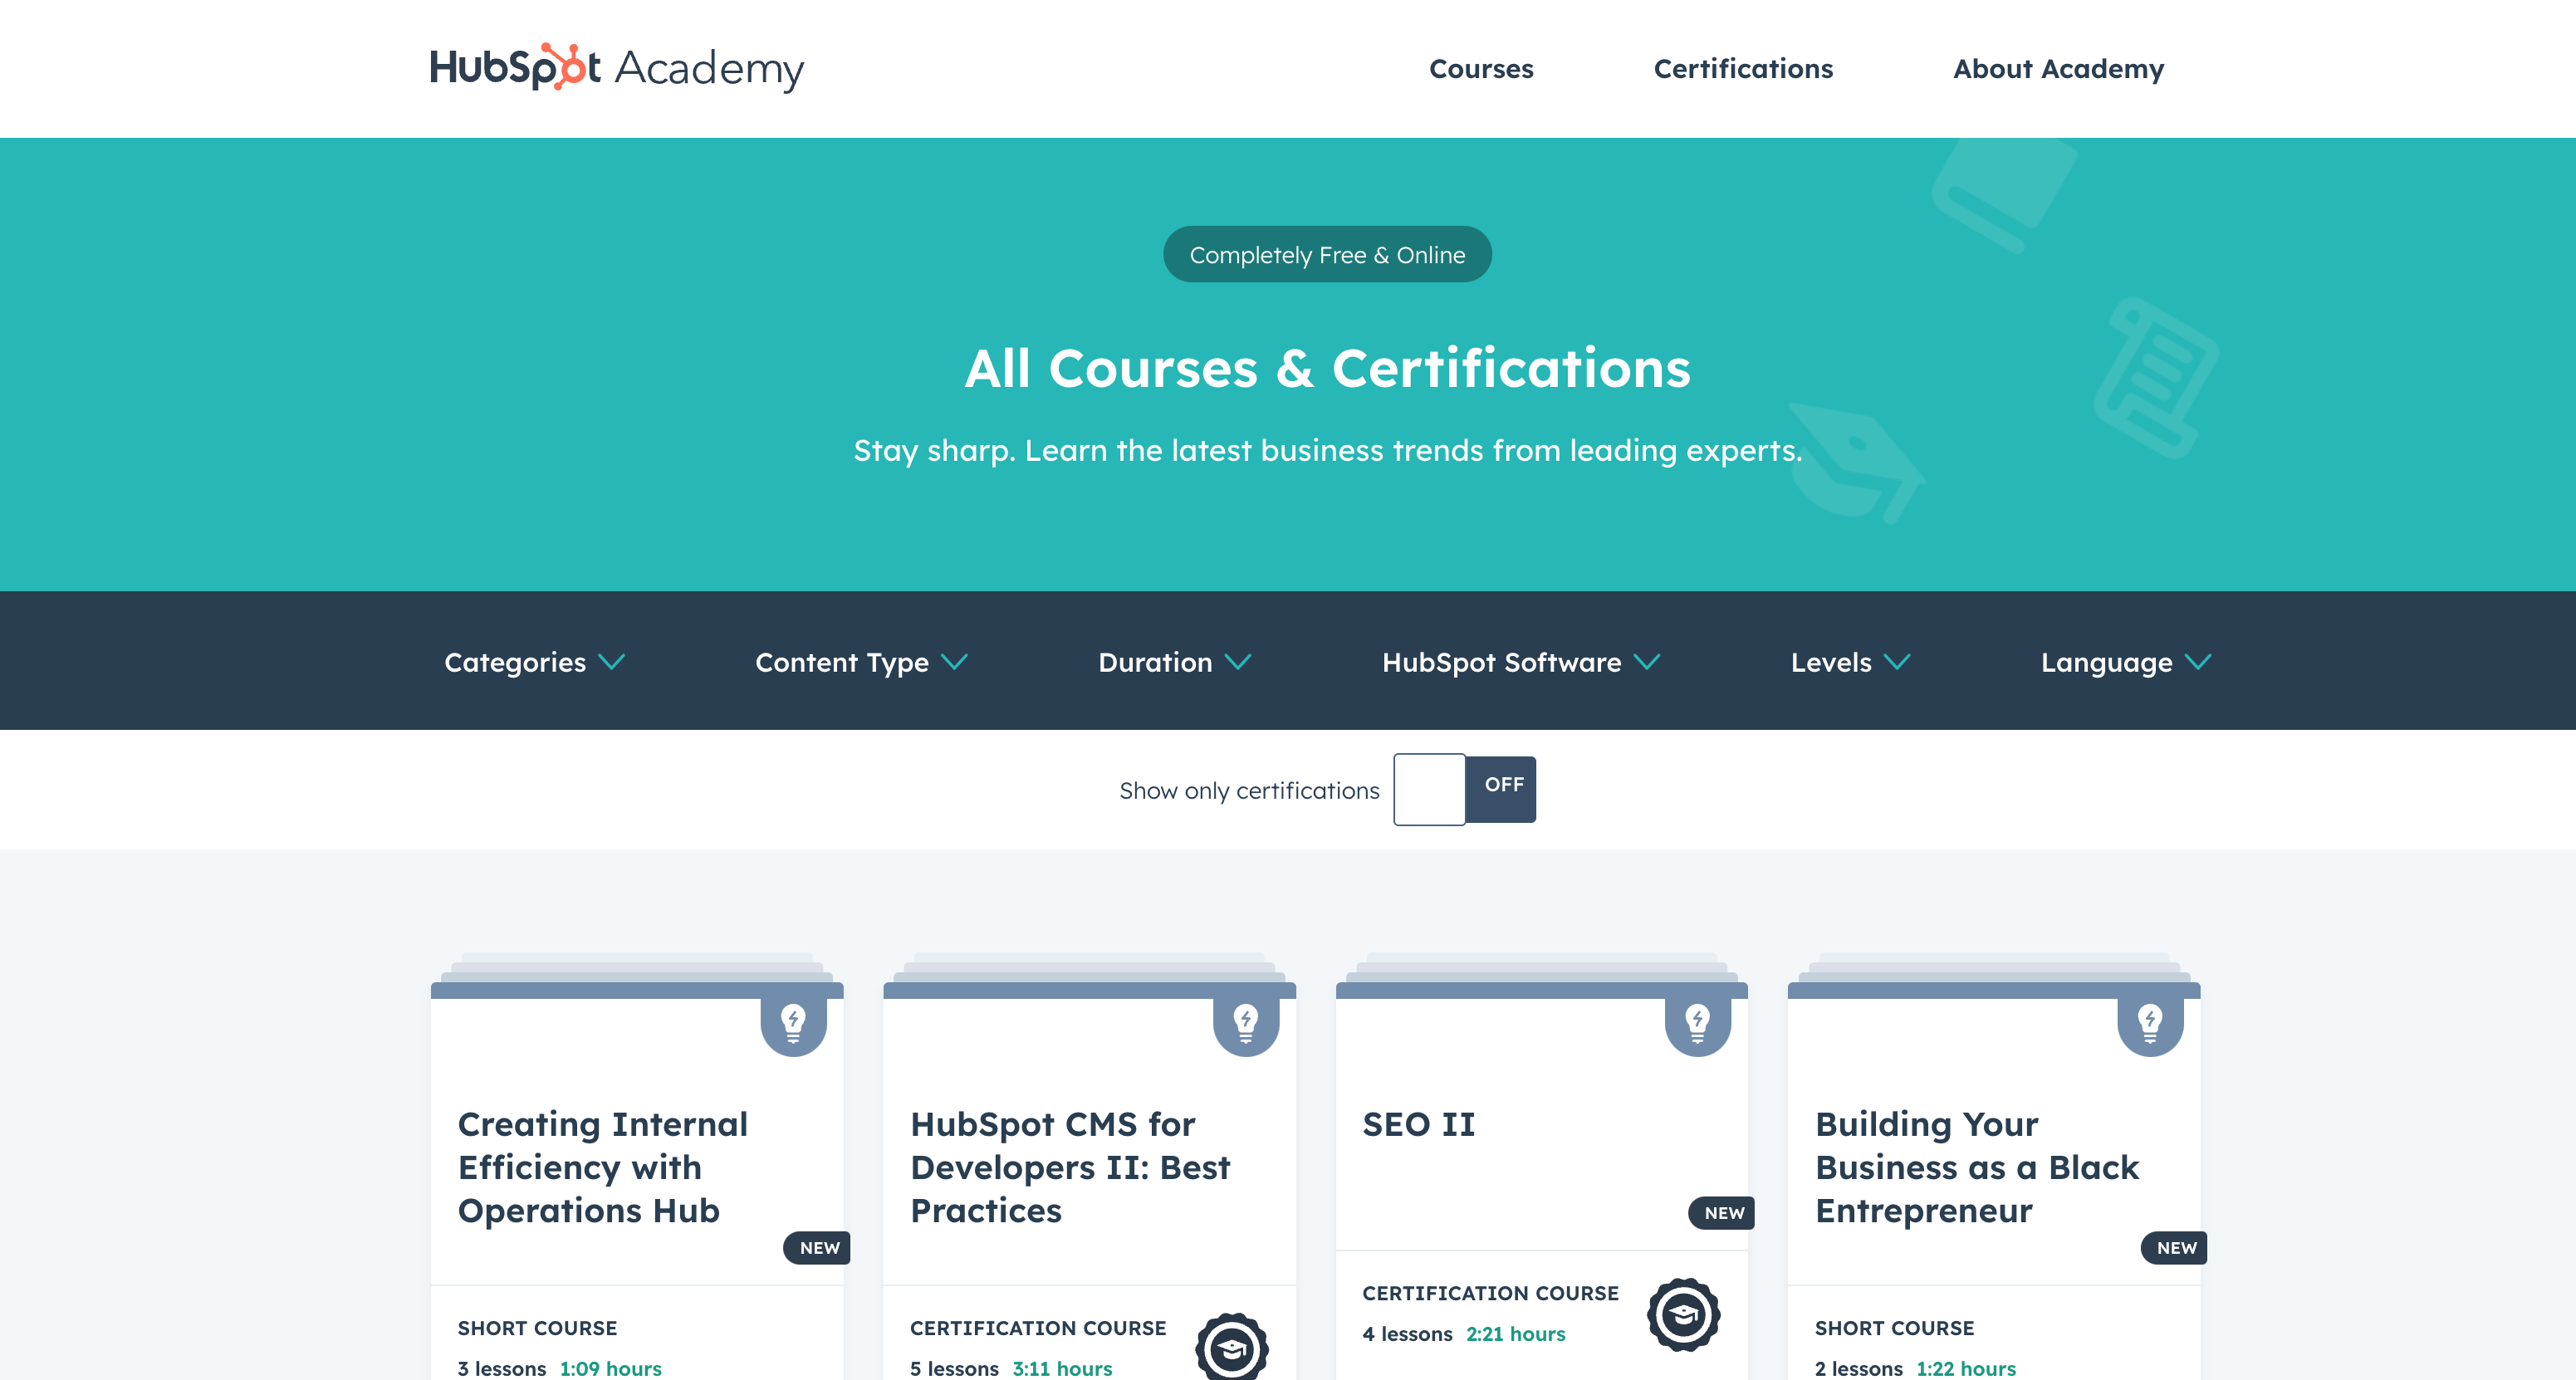 HubSpot Academy Courses site page